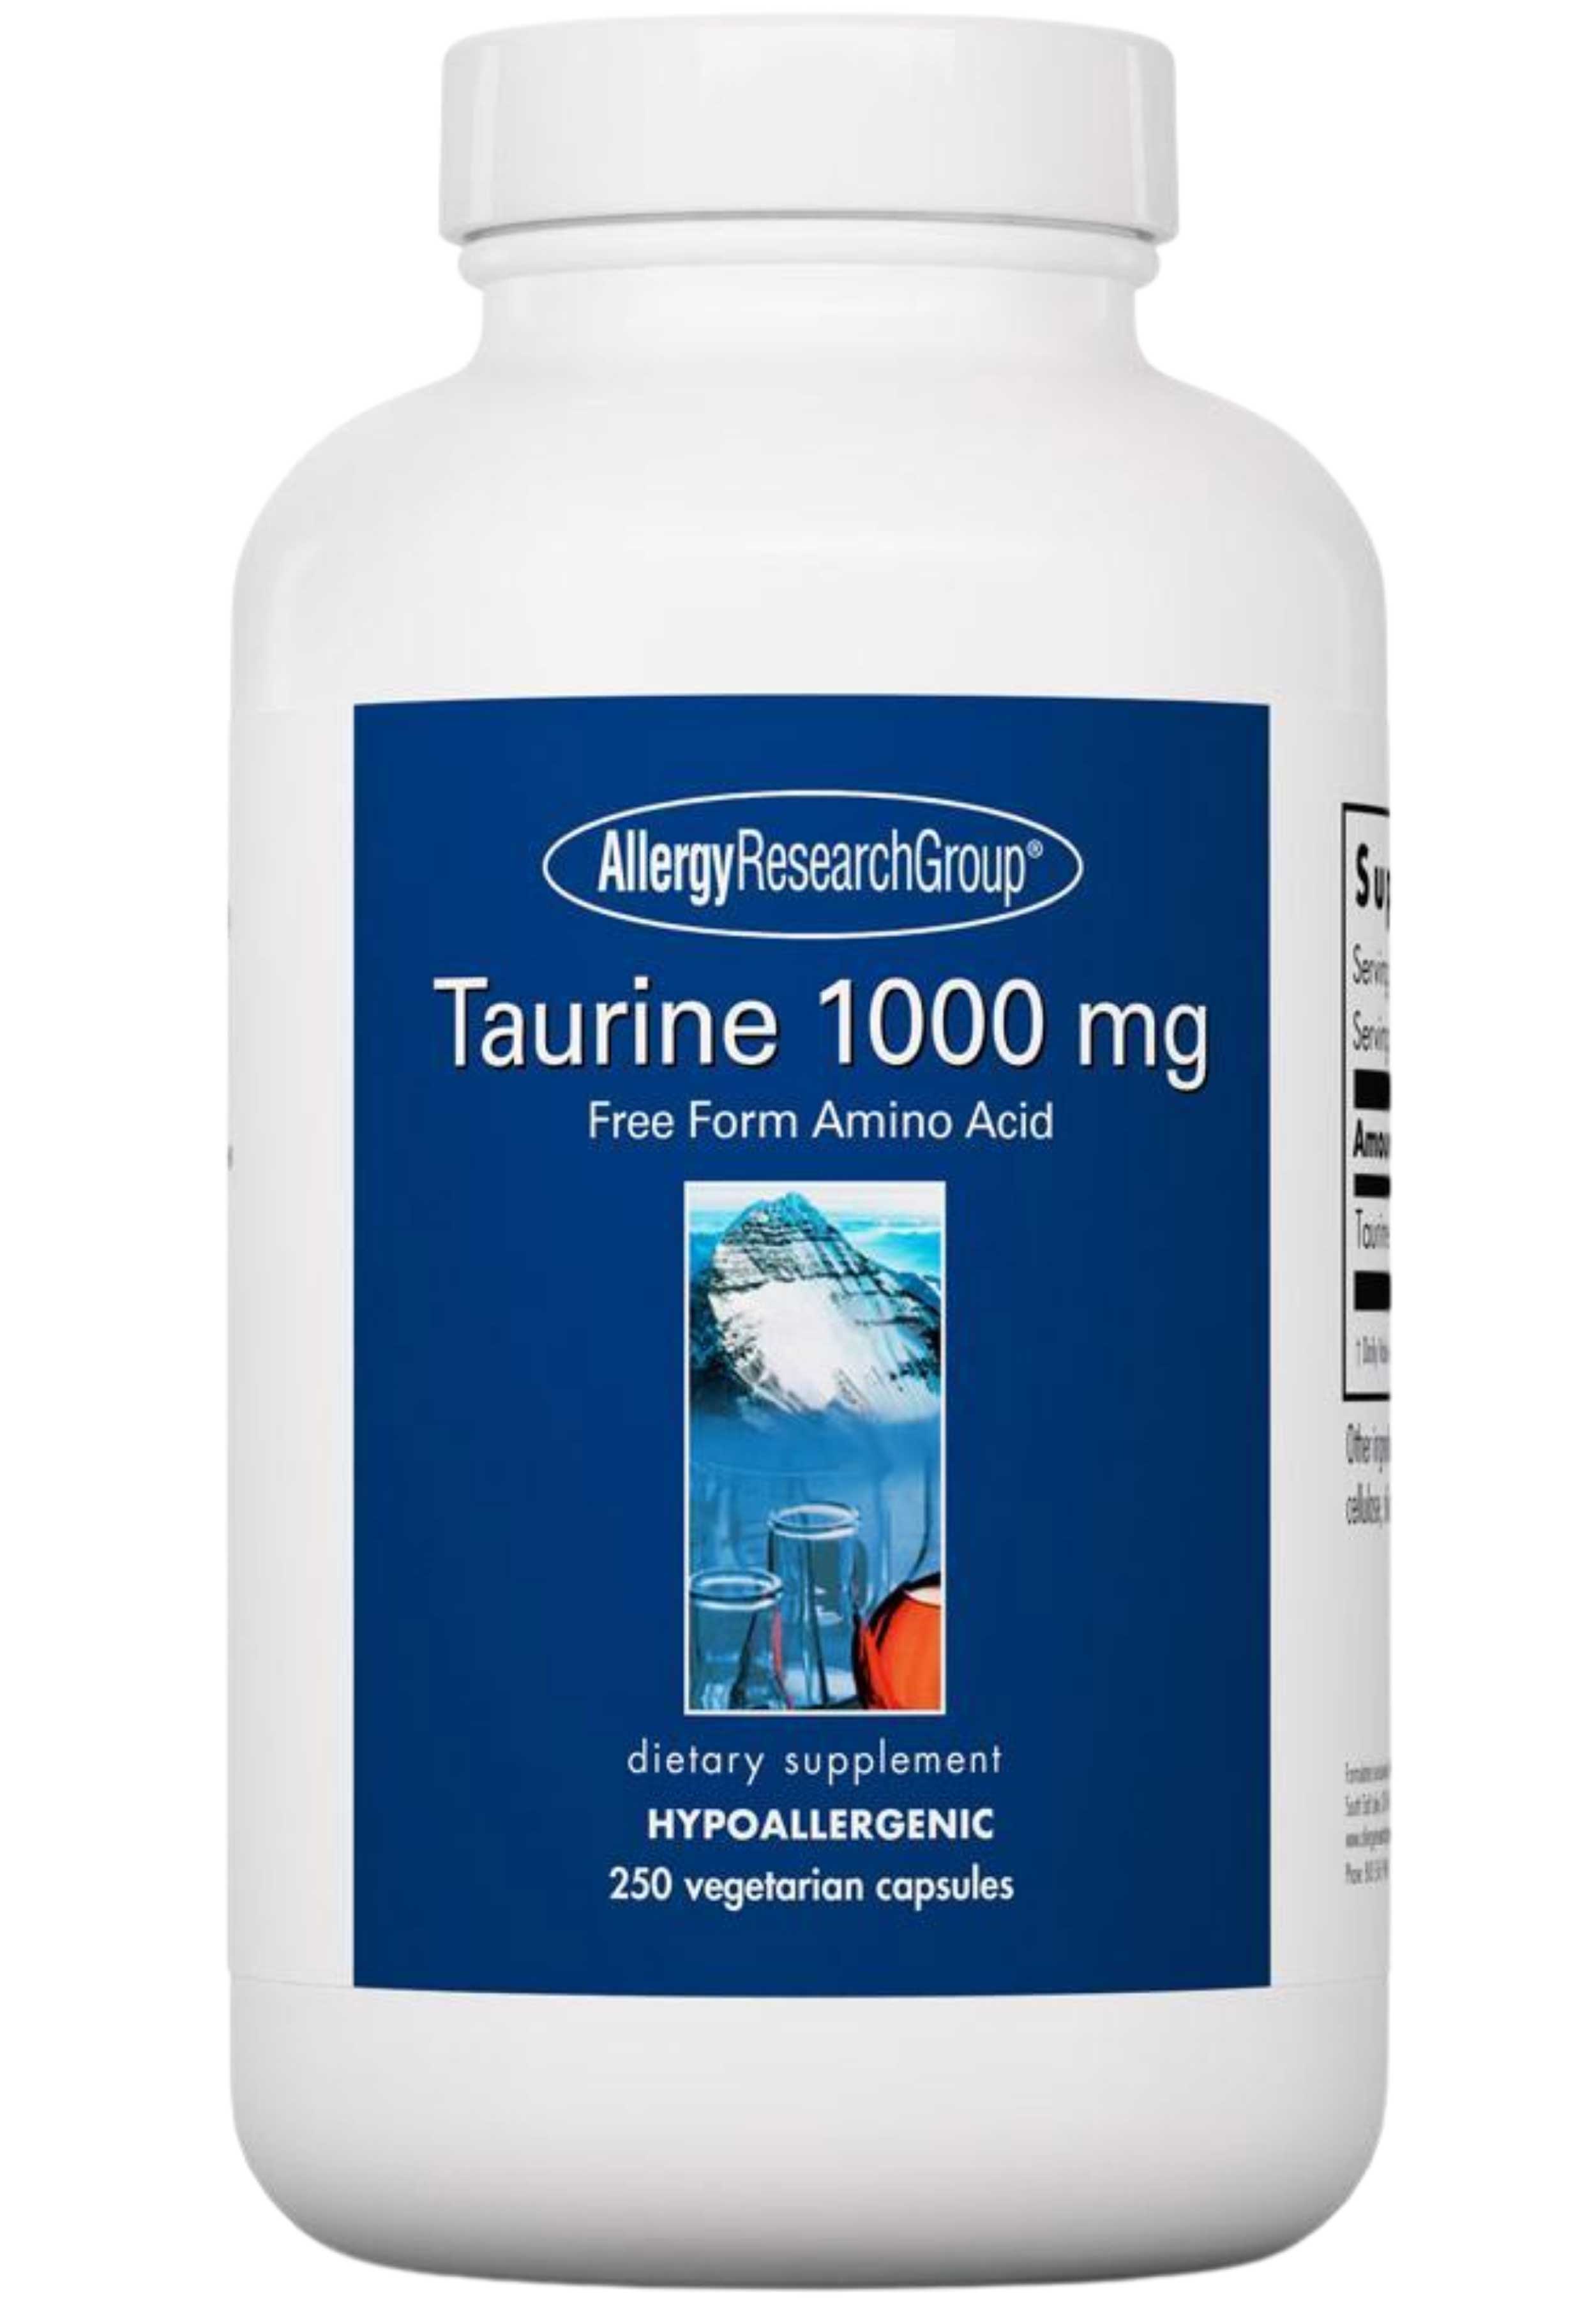 Allergy Research Group Taurine 1000 mg